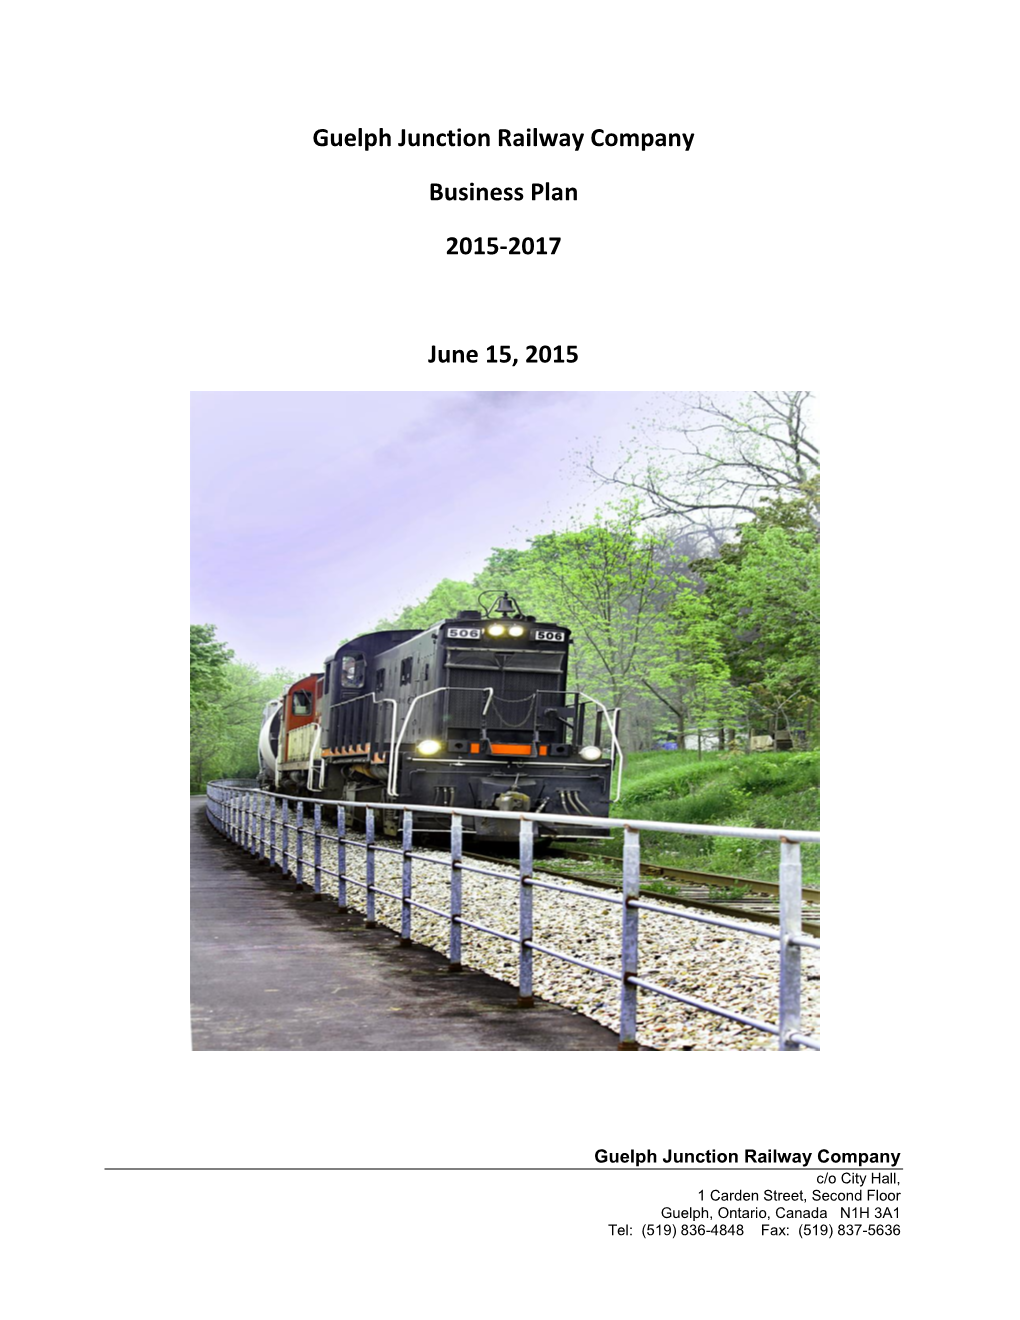 Guelph Junction Railway Company Business Plan 2015-2017 June 15